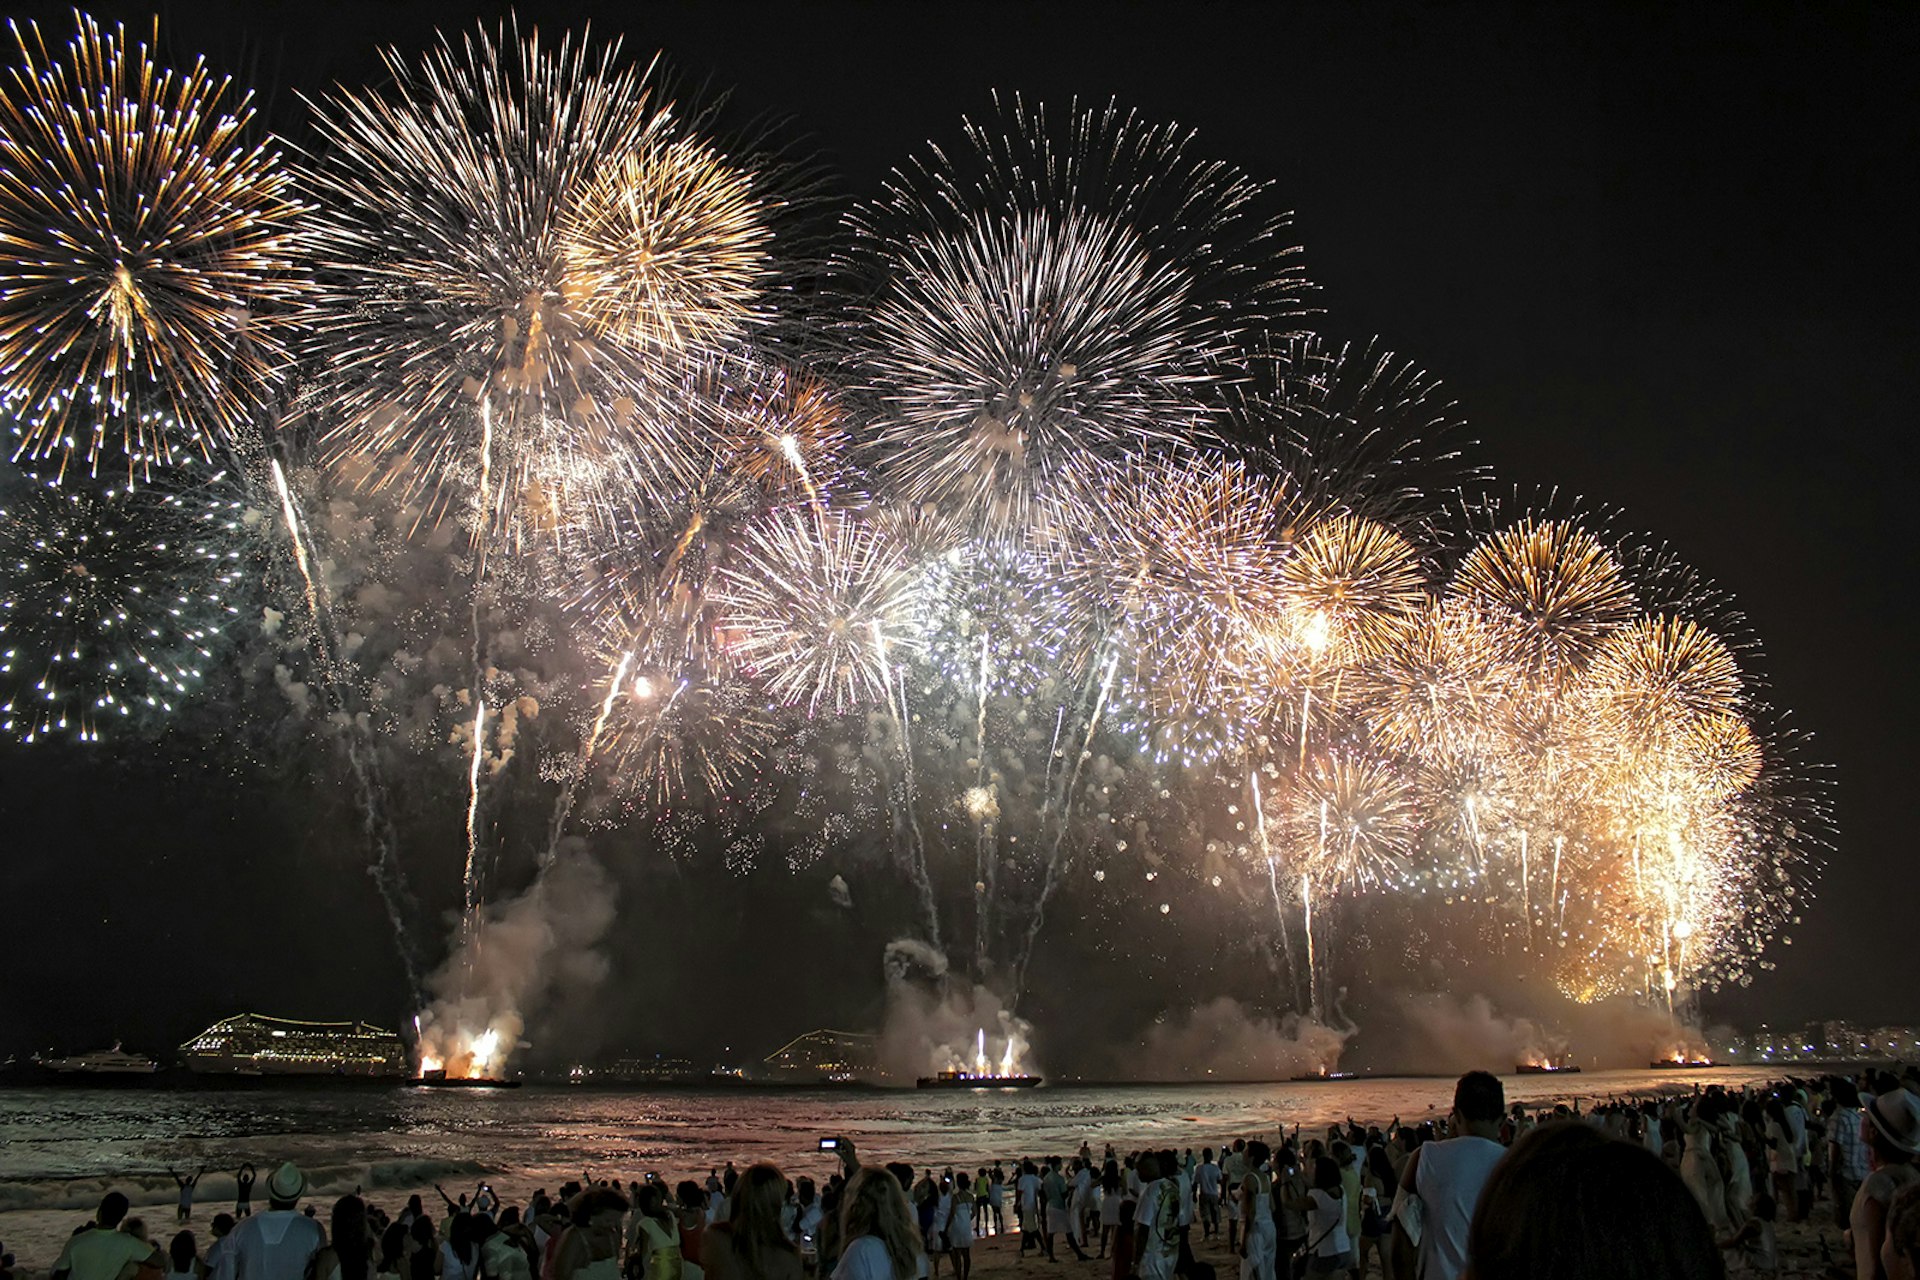 A crowd watches a large fireworks show from Copacabana